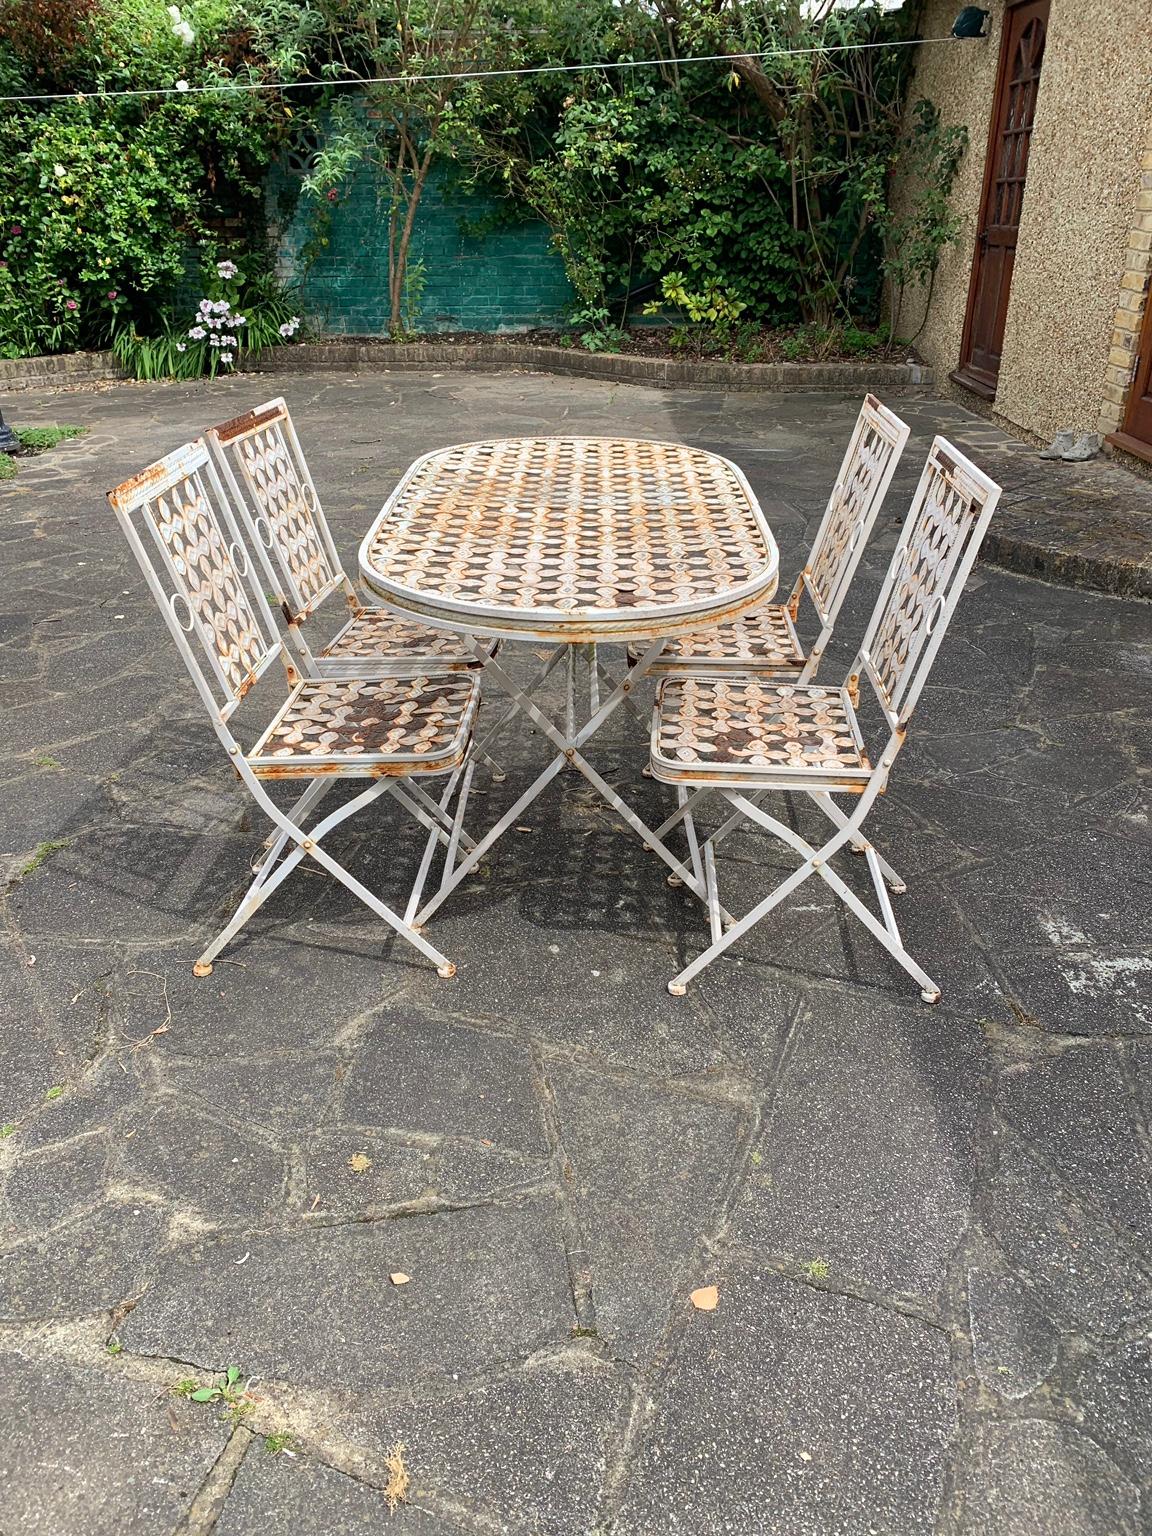 Metal garden table and chairs in UB10 Hillingdon for £15.00 for sale